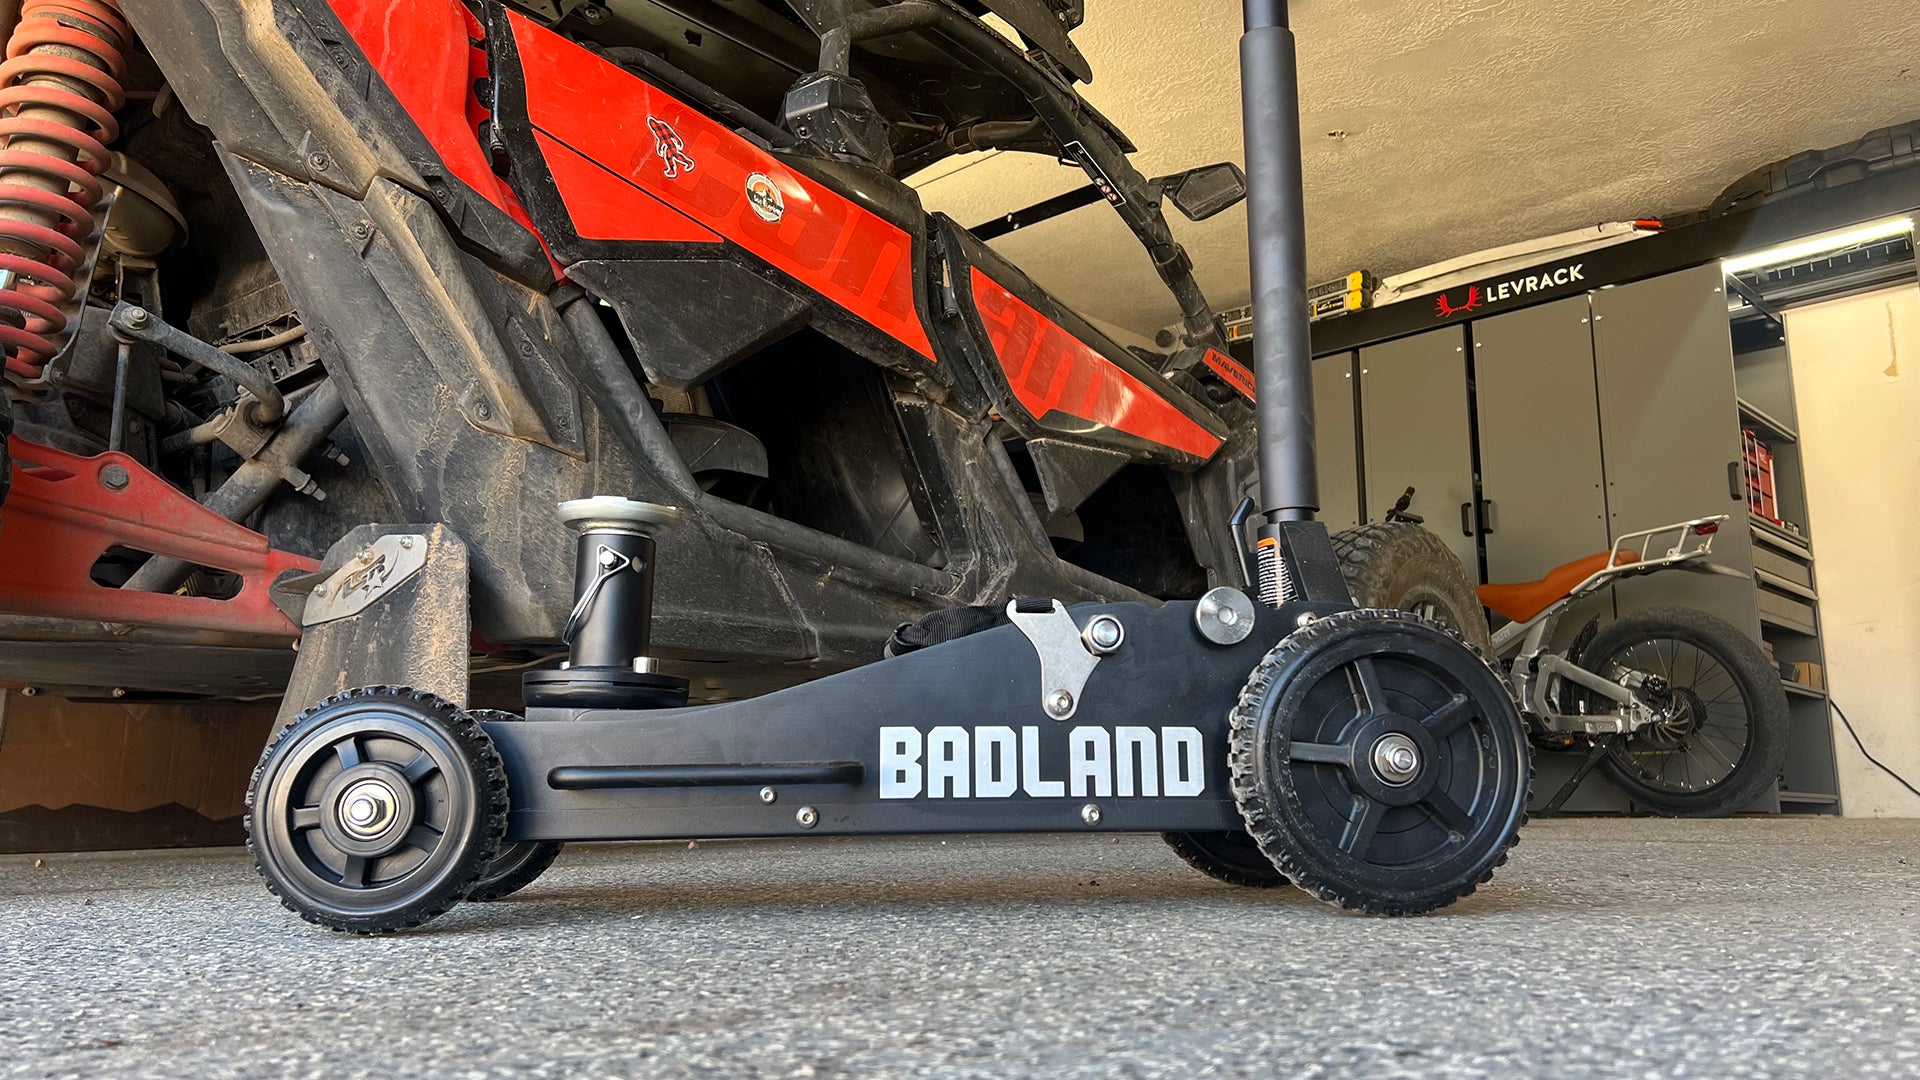 The Harbor Freight Badland All-Terrain Jack proves to be an extremely valuable tool.